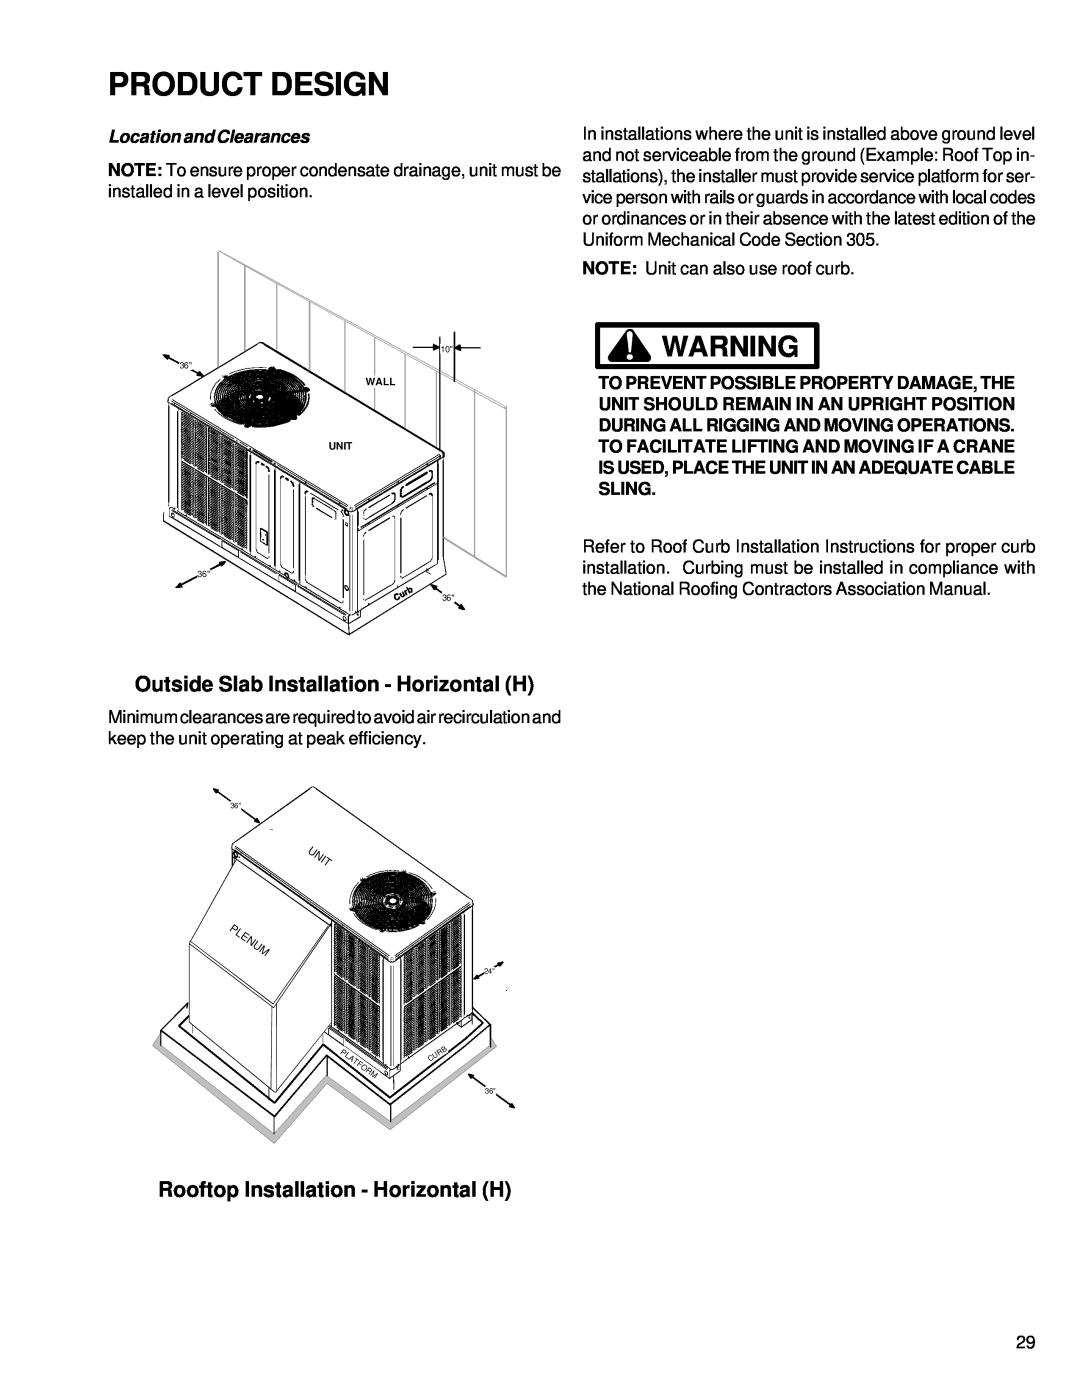 Goodman Mfg GPC 14 SEER R-410 Package Air Conditioners with R-410A Product Design, Rooftop Installation - Horizontal H 